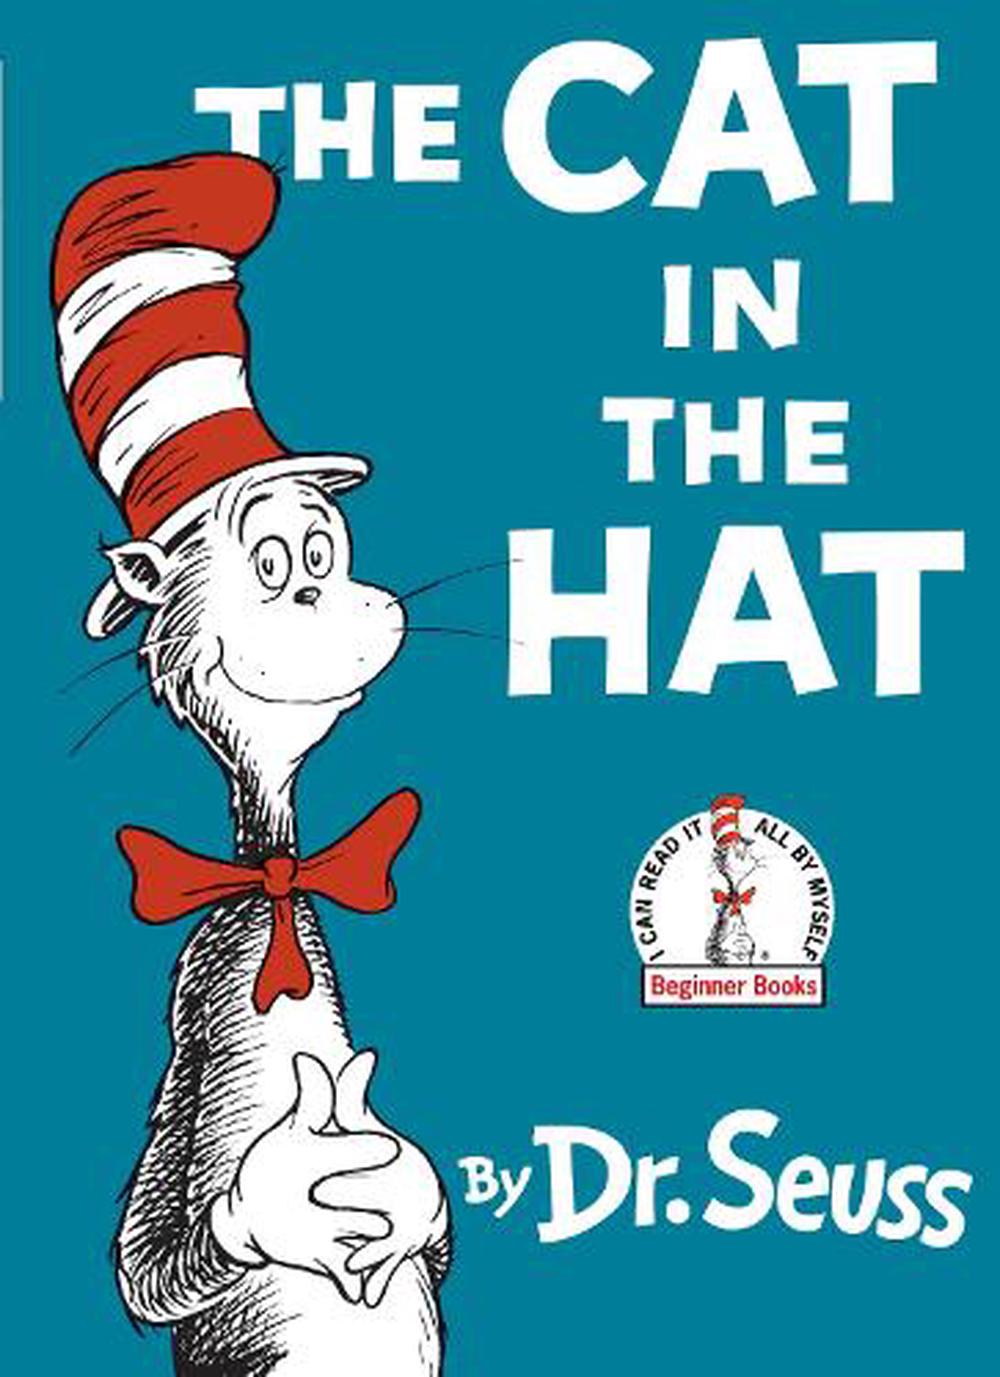 The Cat in the Hat by Dr. Seuss, Hardcover, 9780394800011 | Buy online ...